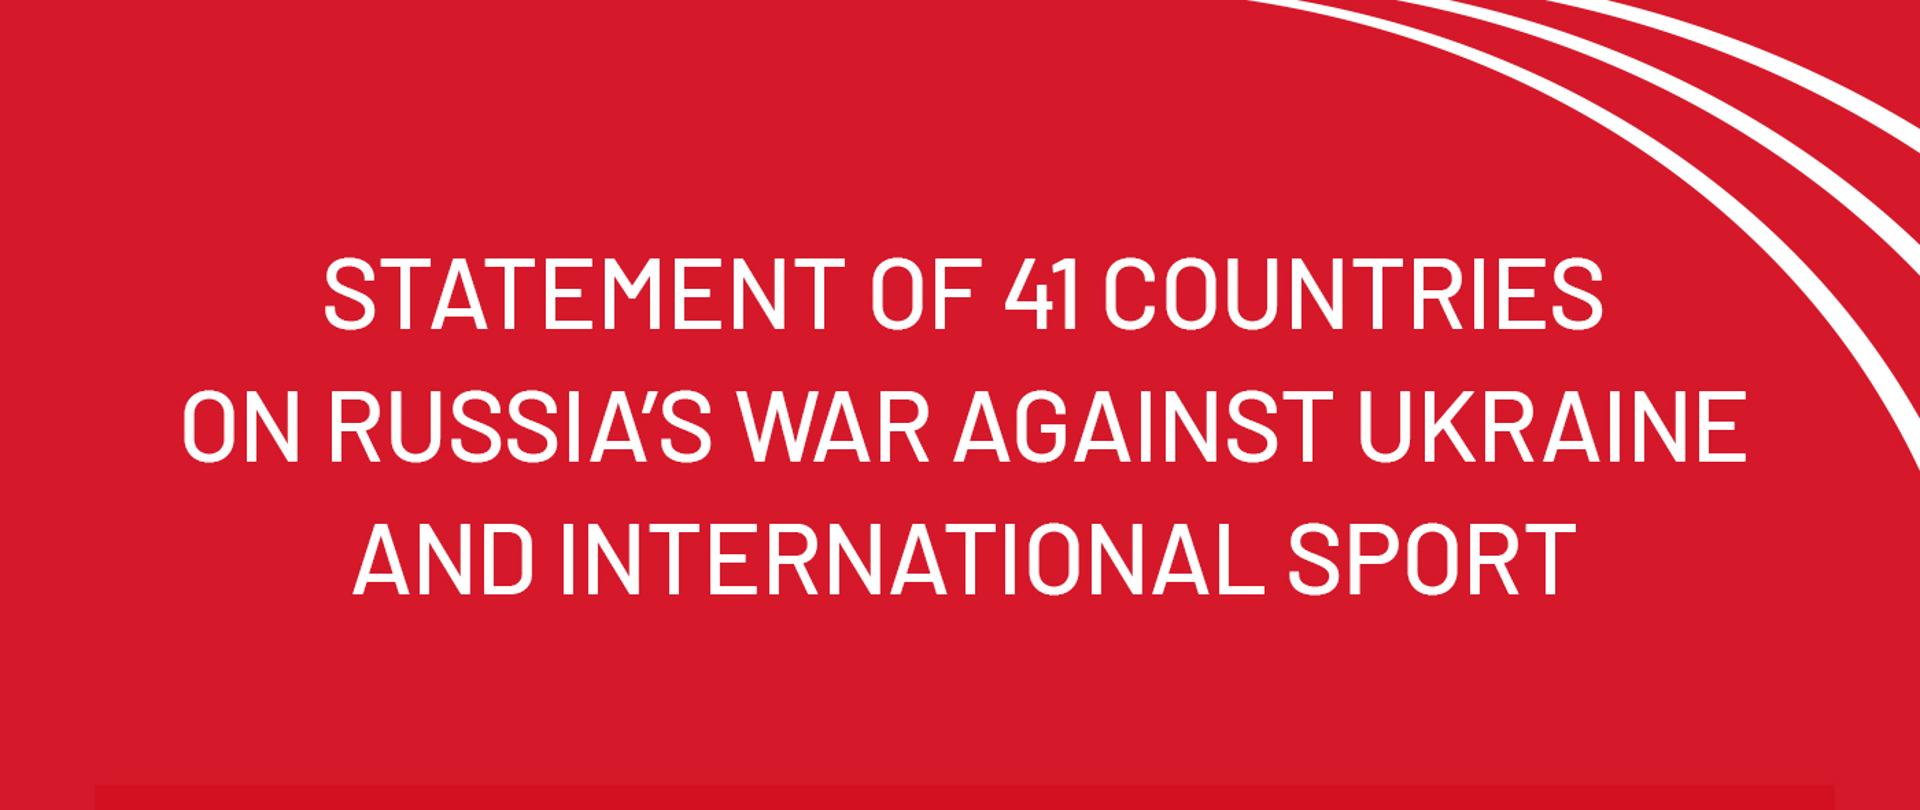 red banner with white letters: Statement of 41 countries on Russia's war against Ukraine and International sport